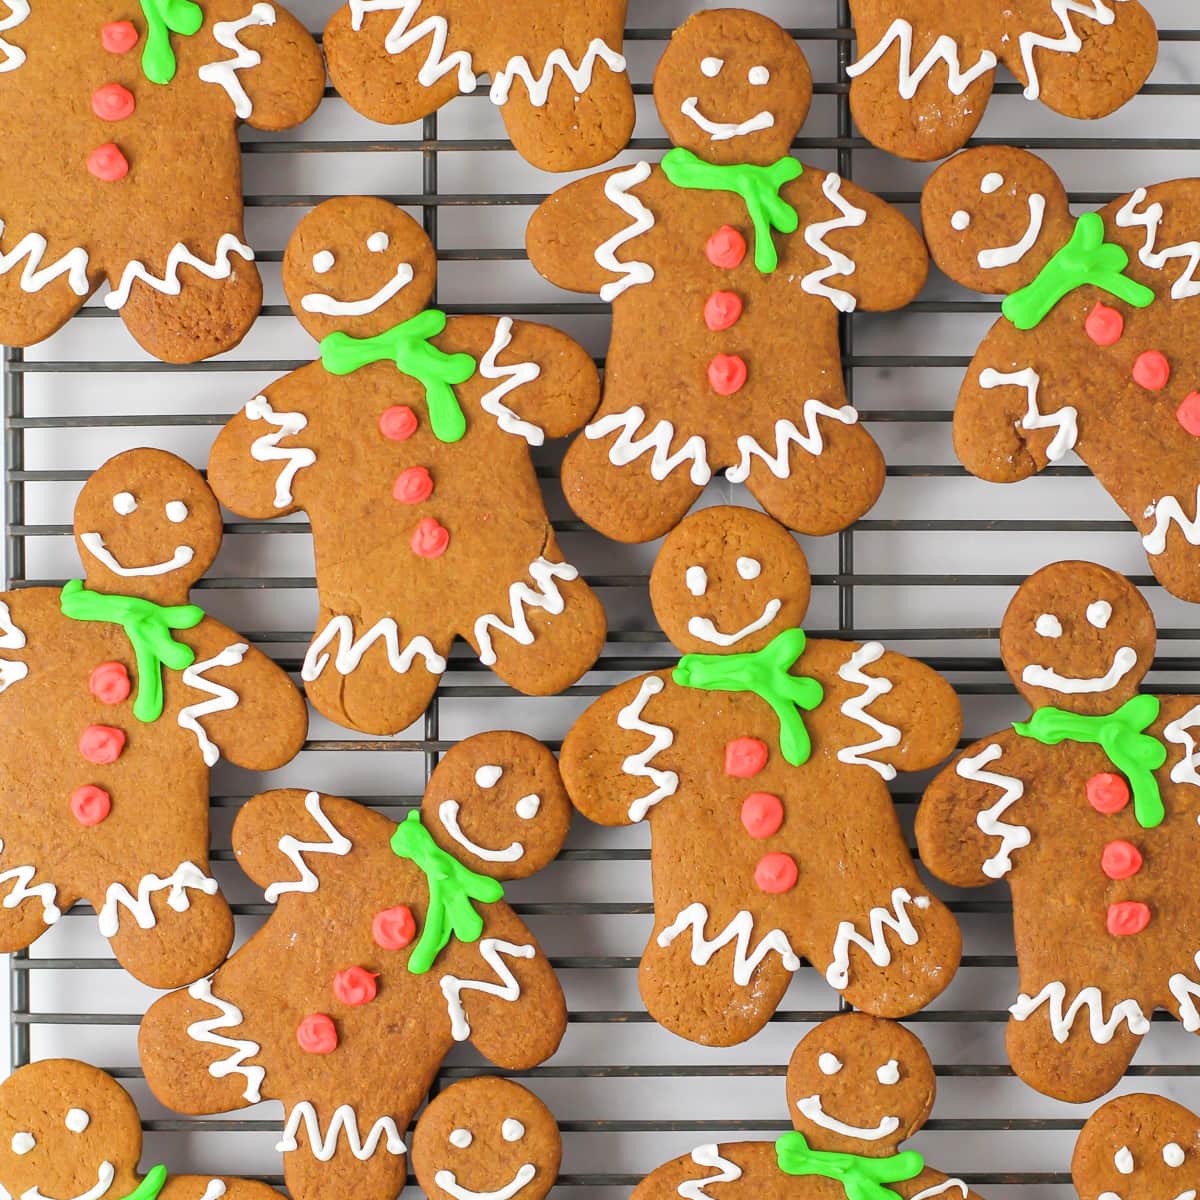 Top view of decorated gingerbread men on a cooling rack.